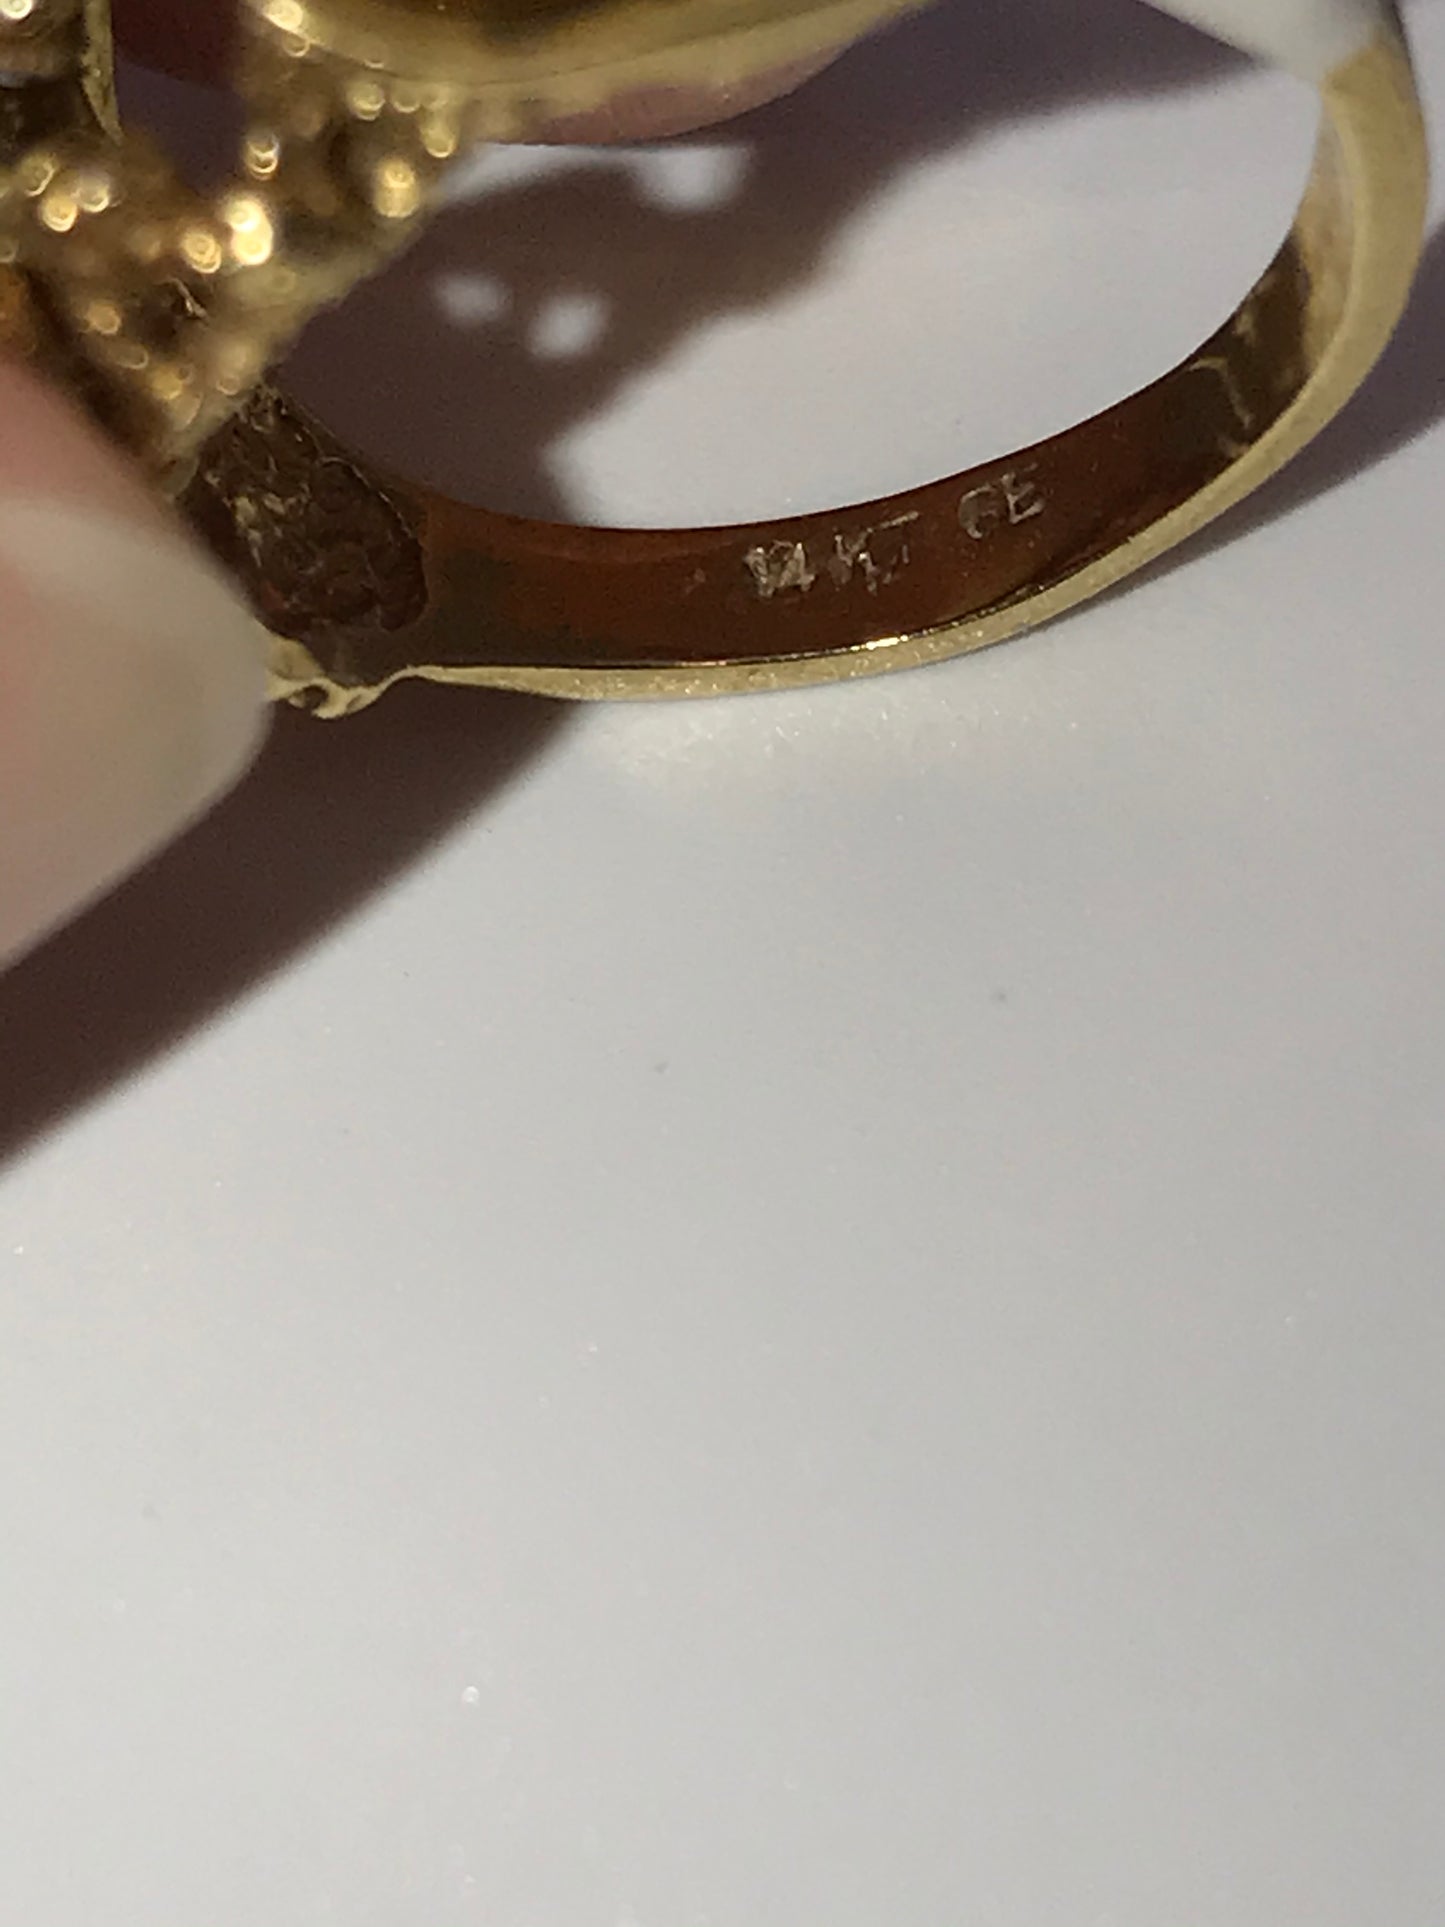 14 Kt Gp Ring, Pretty And Simple Design, Size 5